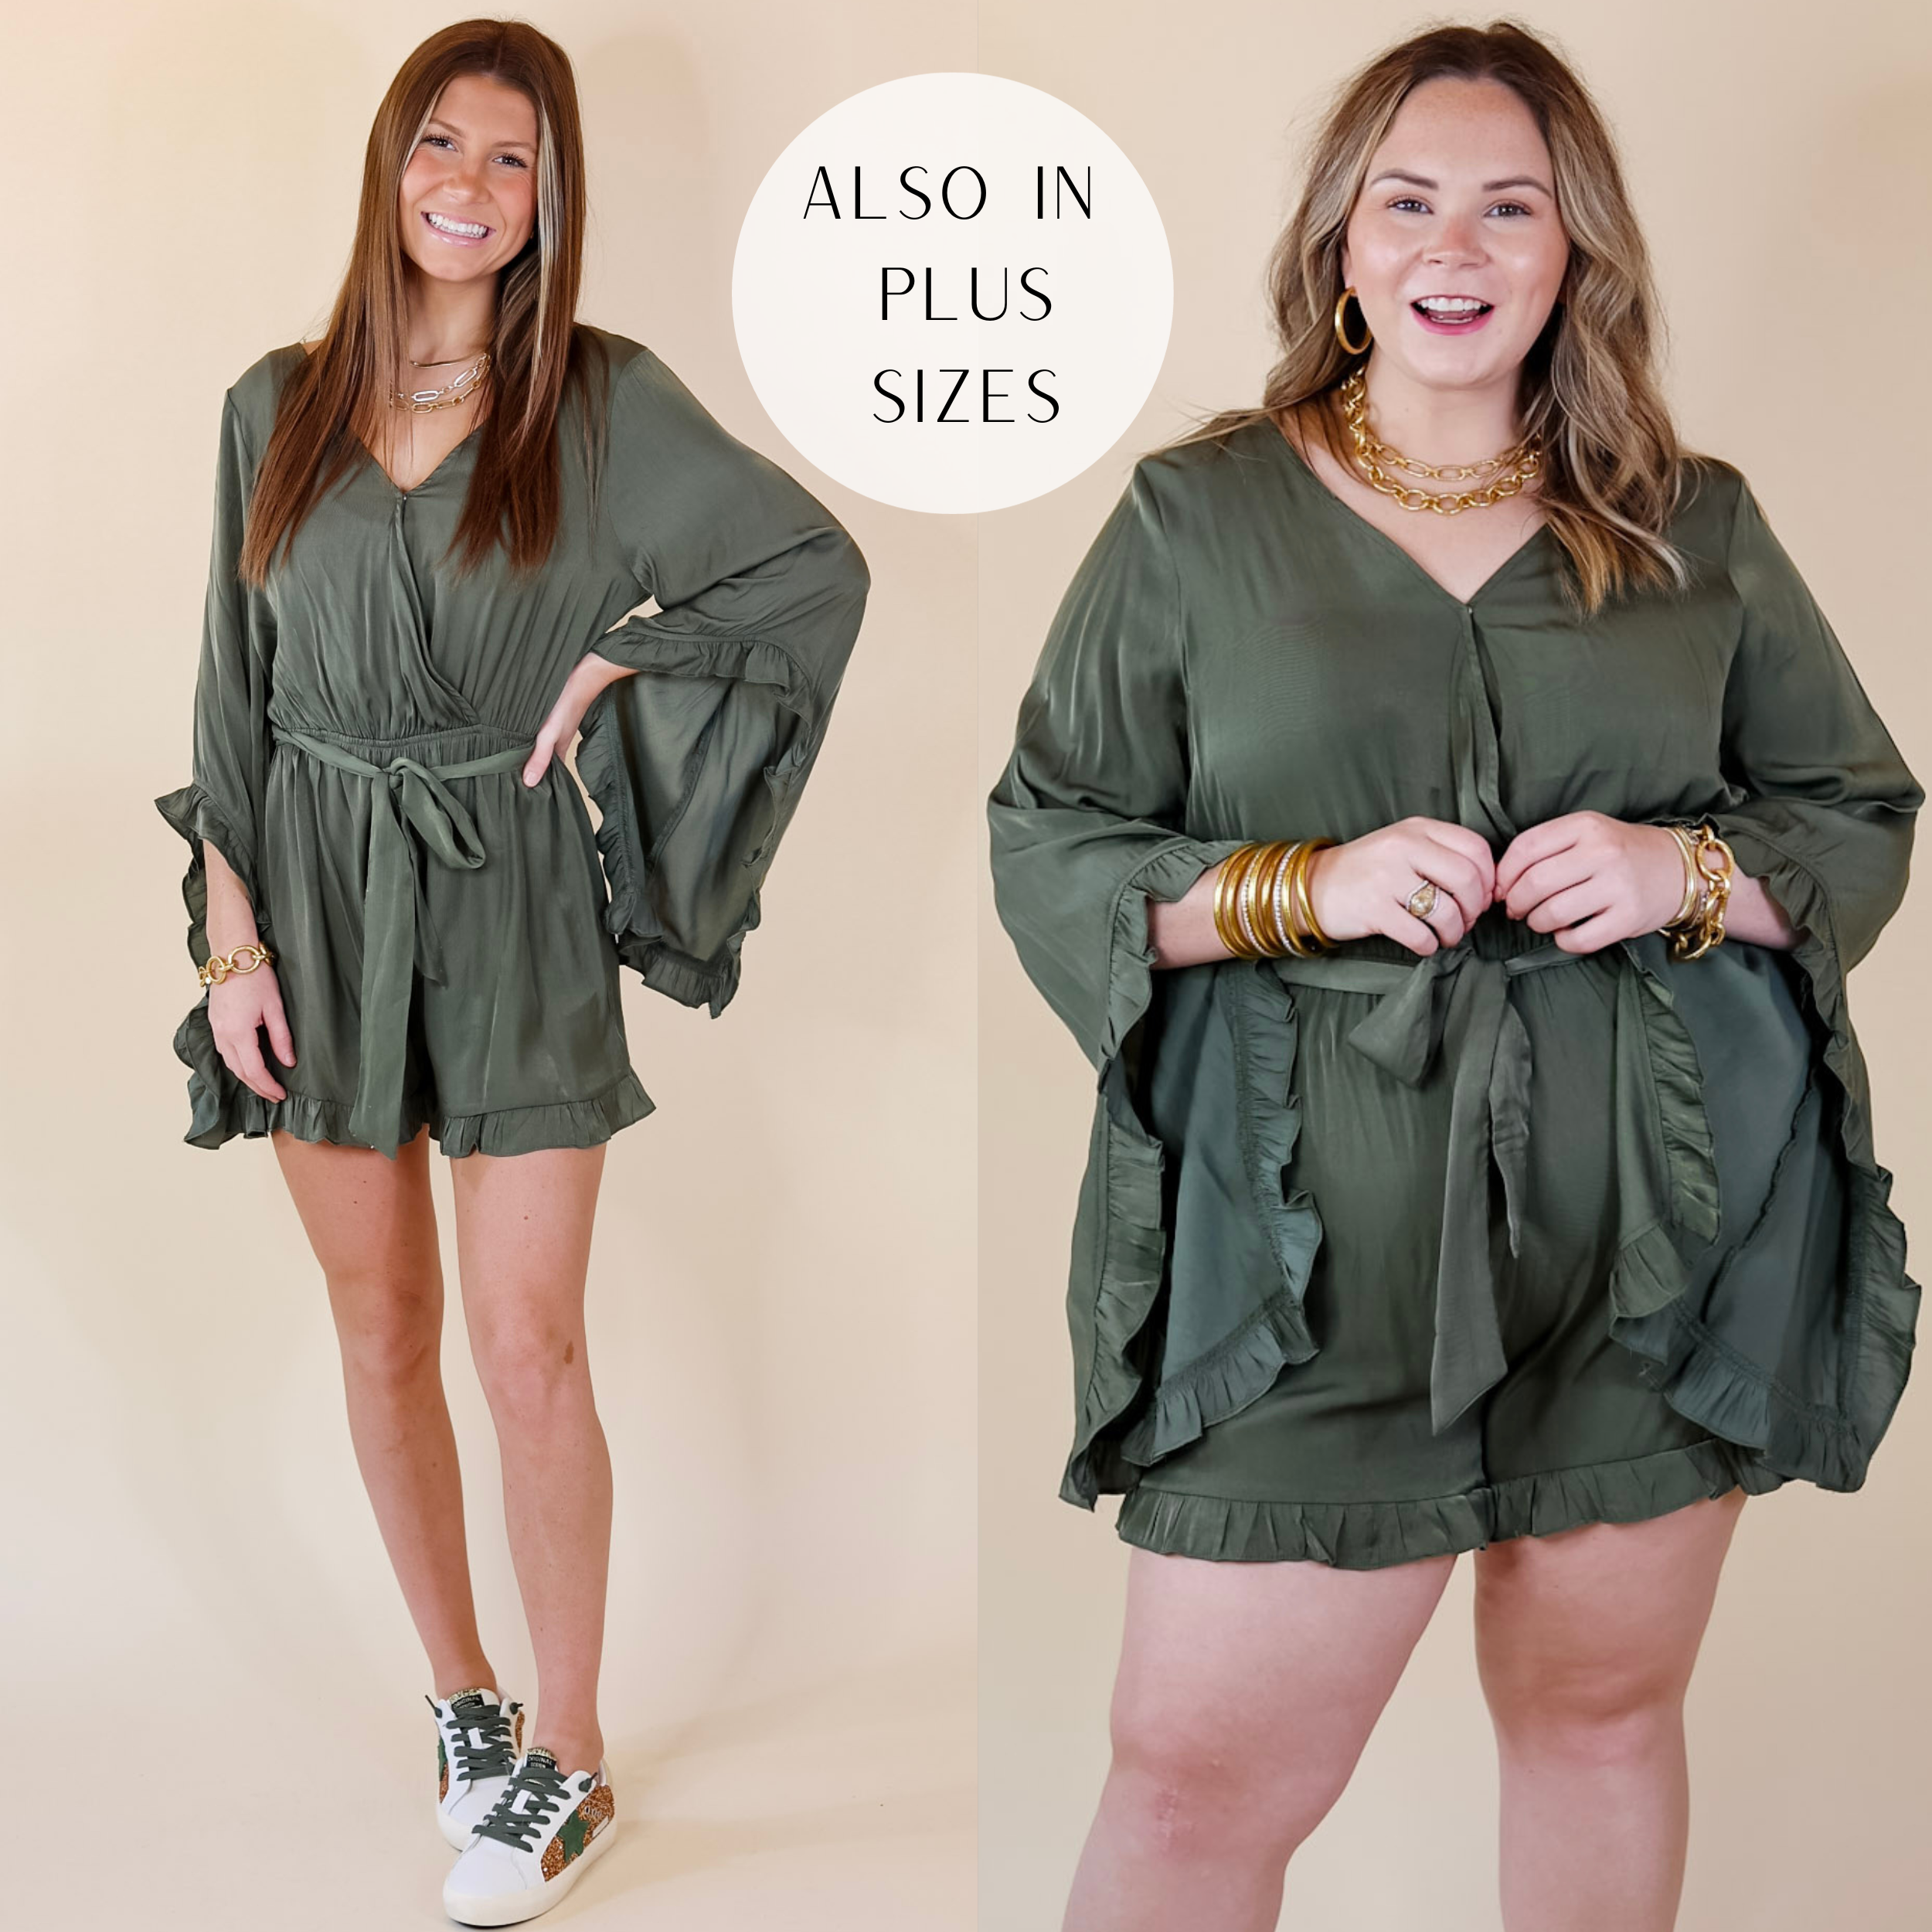 In the picture the model is wearing a ruffle trim long sleeve satin romper in olive green with a white background